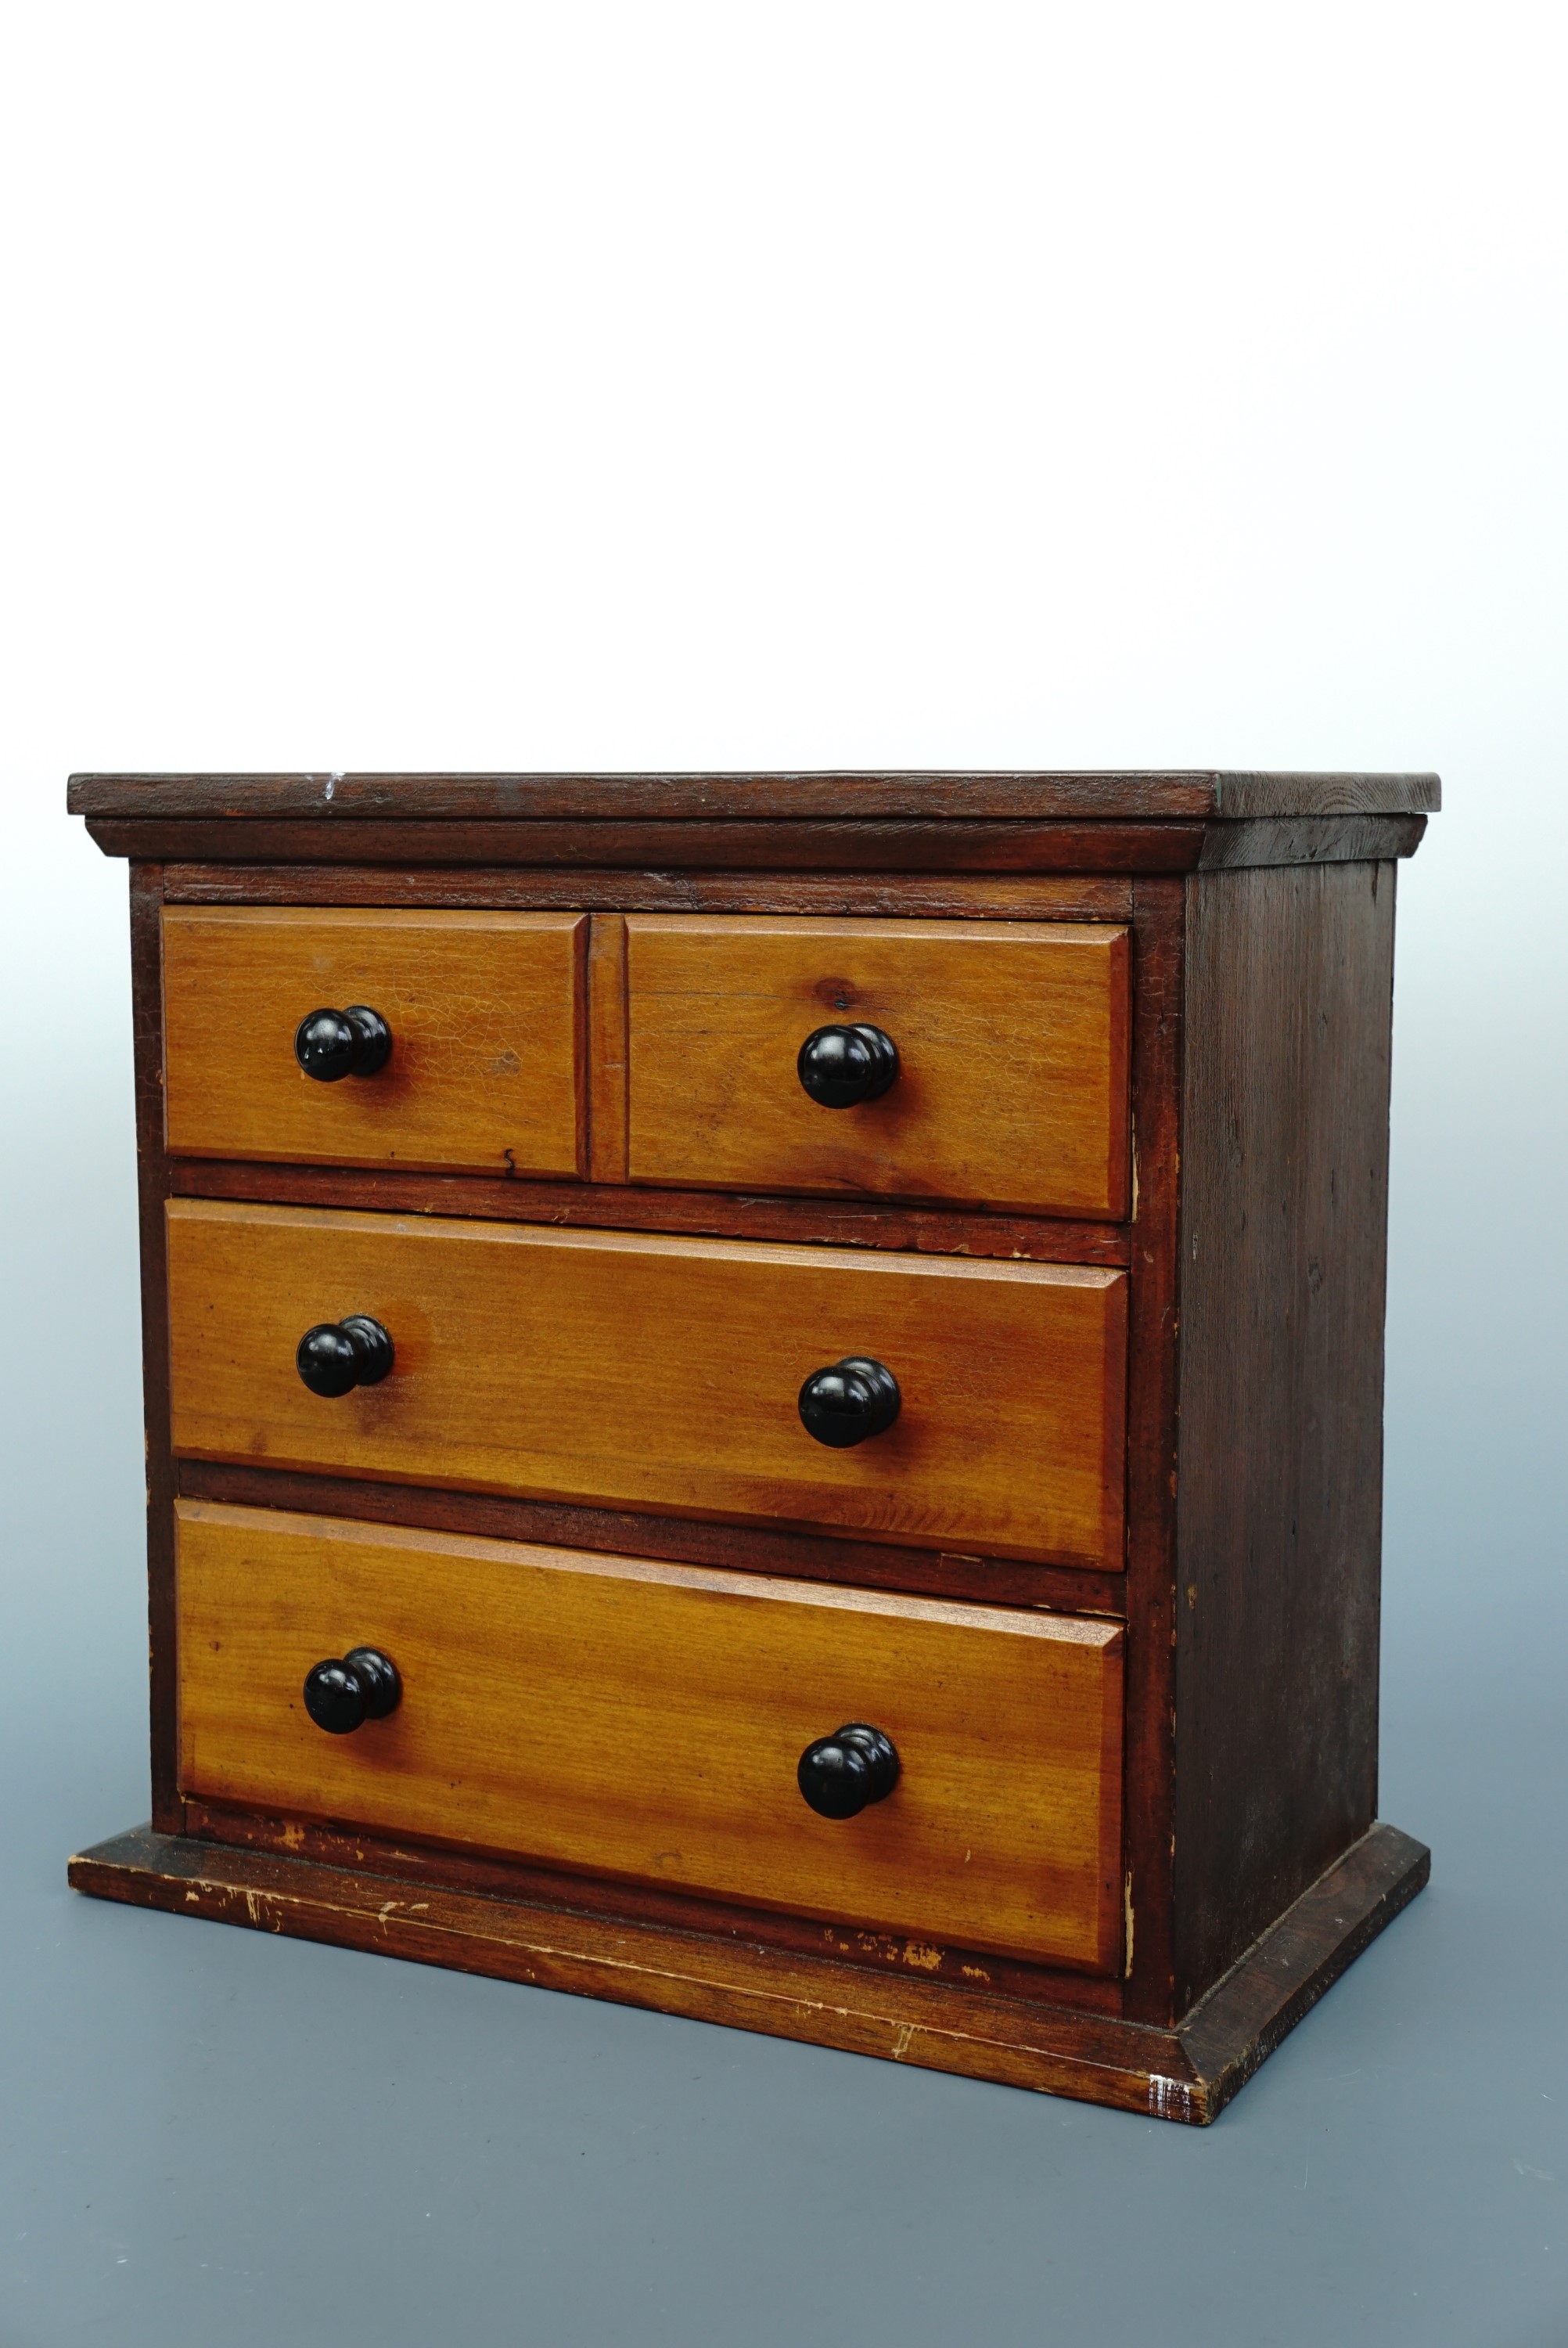 A Victorian miniature pine chest of drawers, 33 cm x 18 cm x 31 cm high - Image 2 of 2